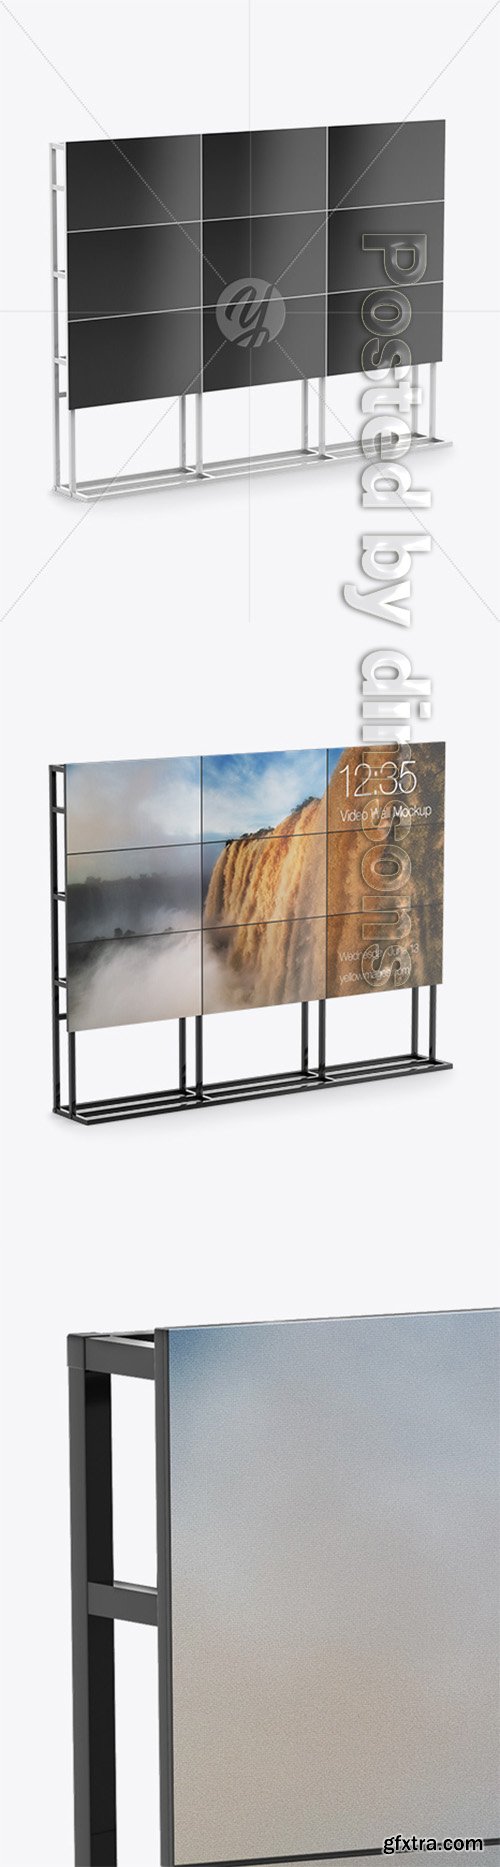 LCD Video Wall Stand Mockup - Half Side View 31443